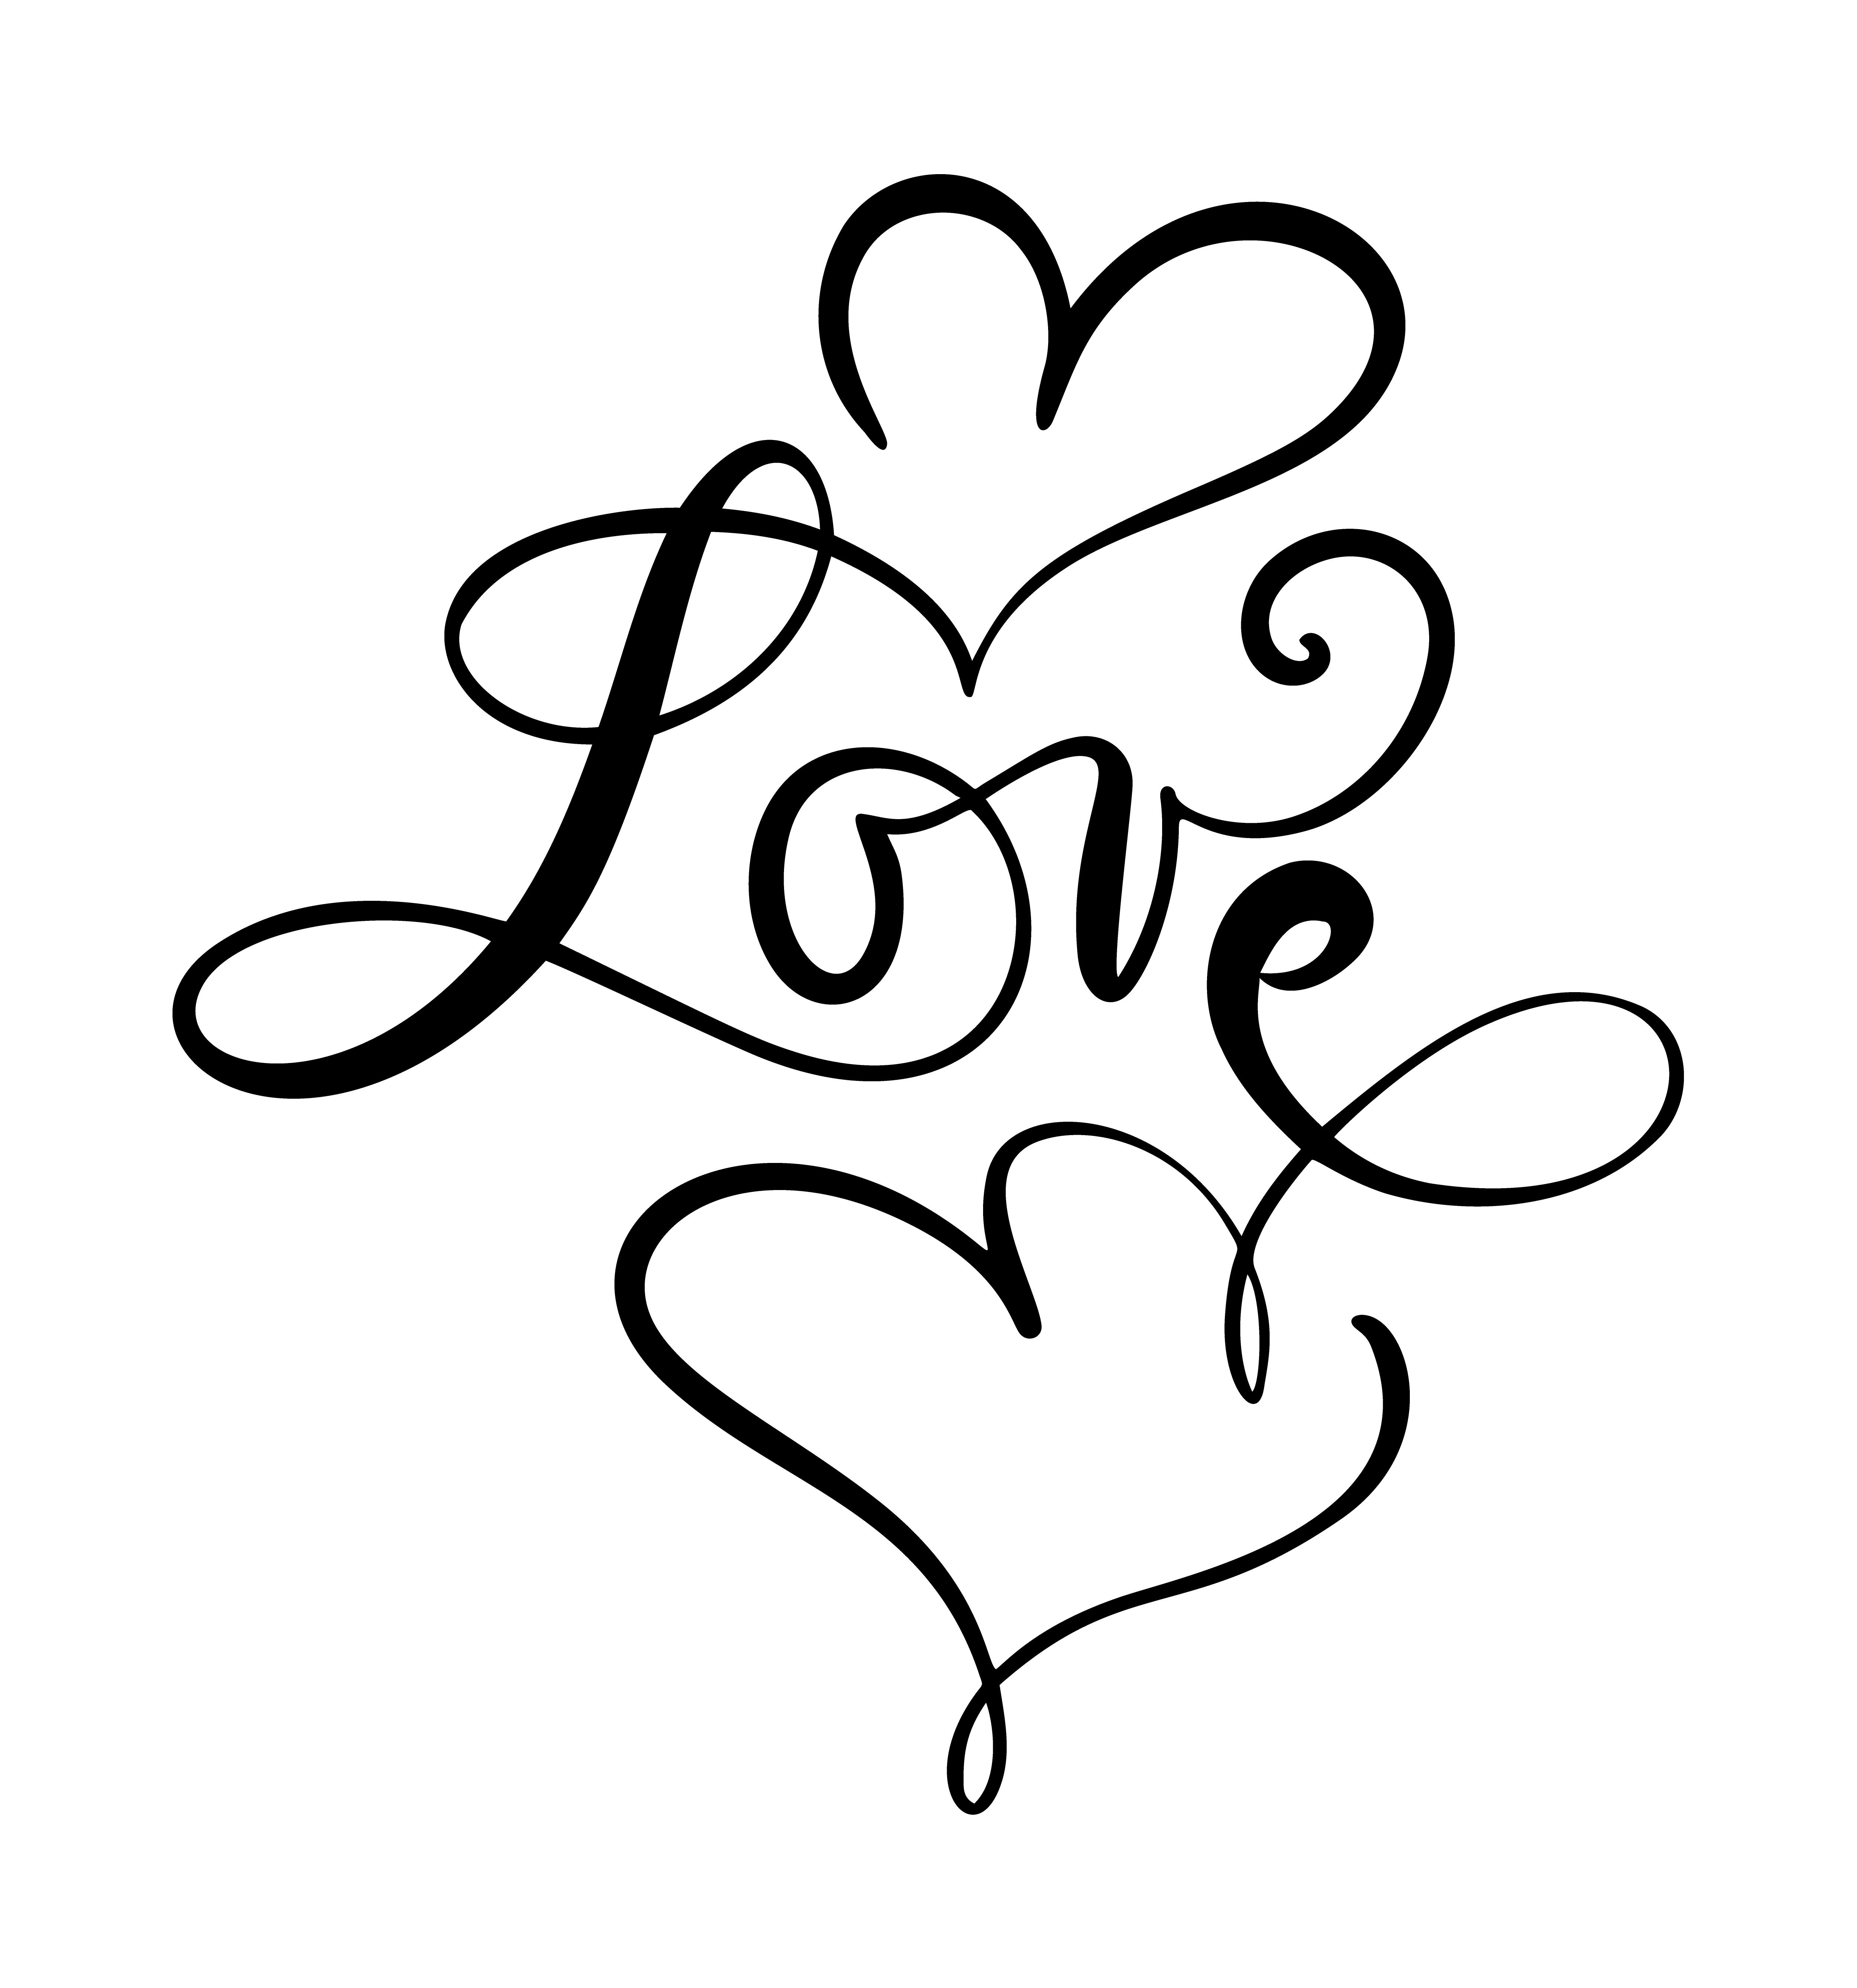 Download Love Horror Svg Black And White - Layered SVG Cut File